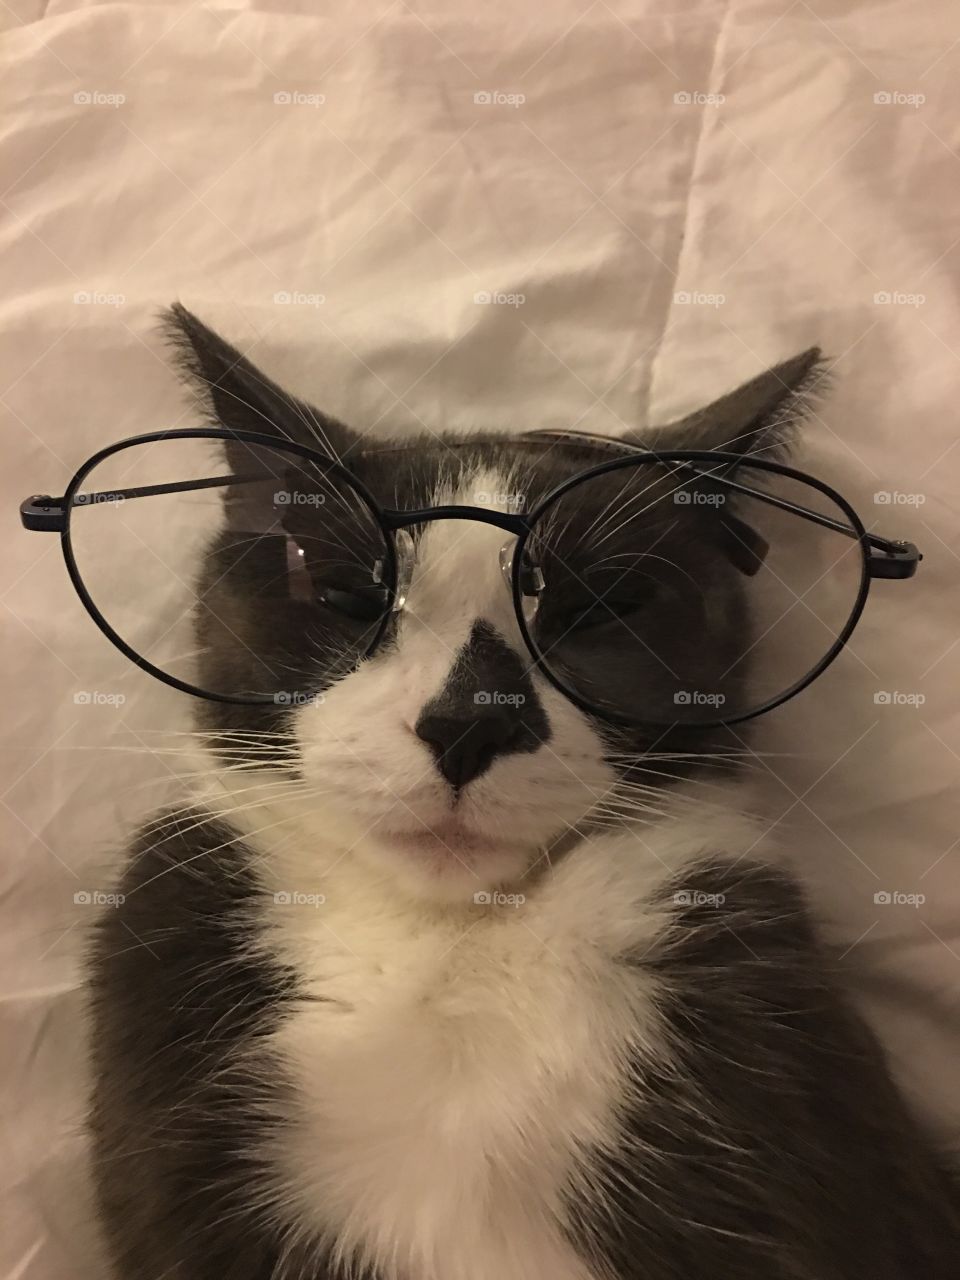 Noah the crazy cat with glasses